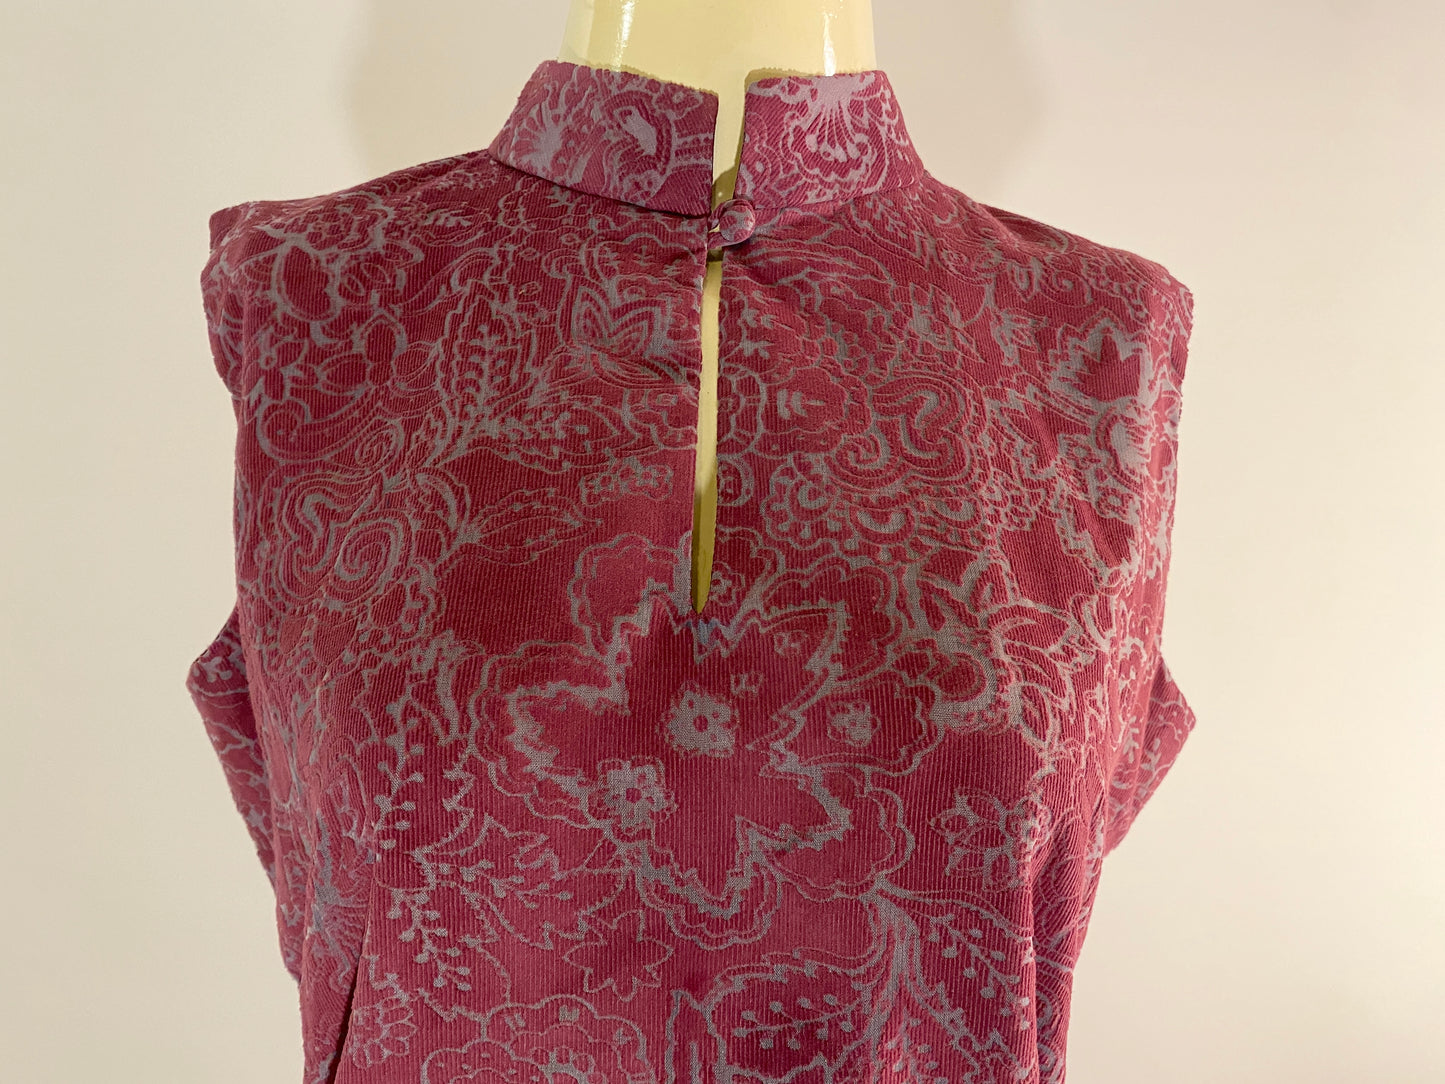 Jasmin Top with Harris Tweed belt and Hand Embroidery - Plum